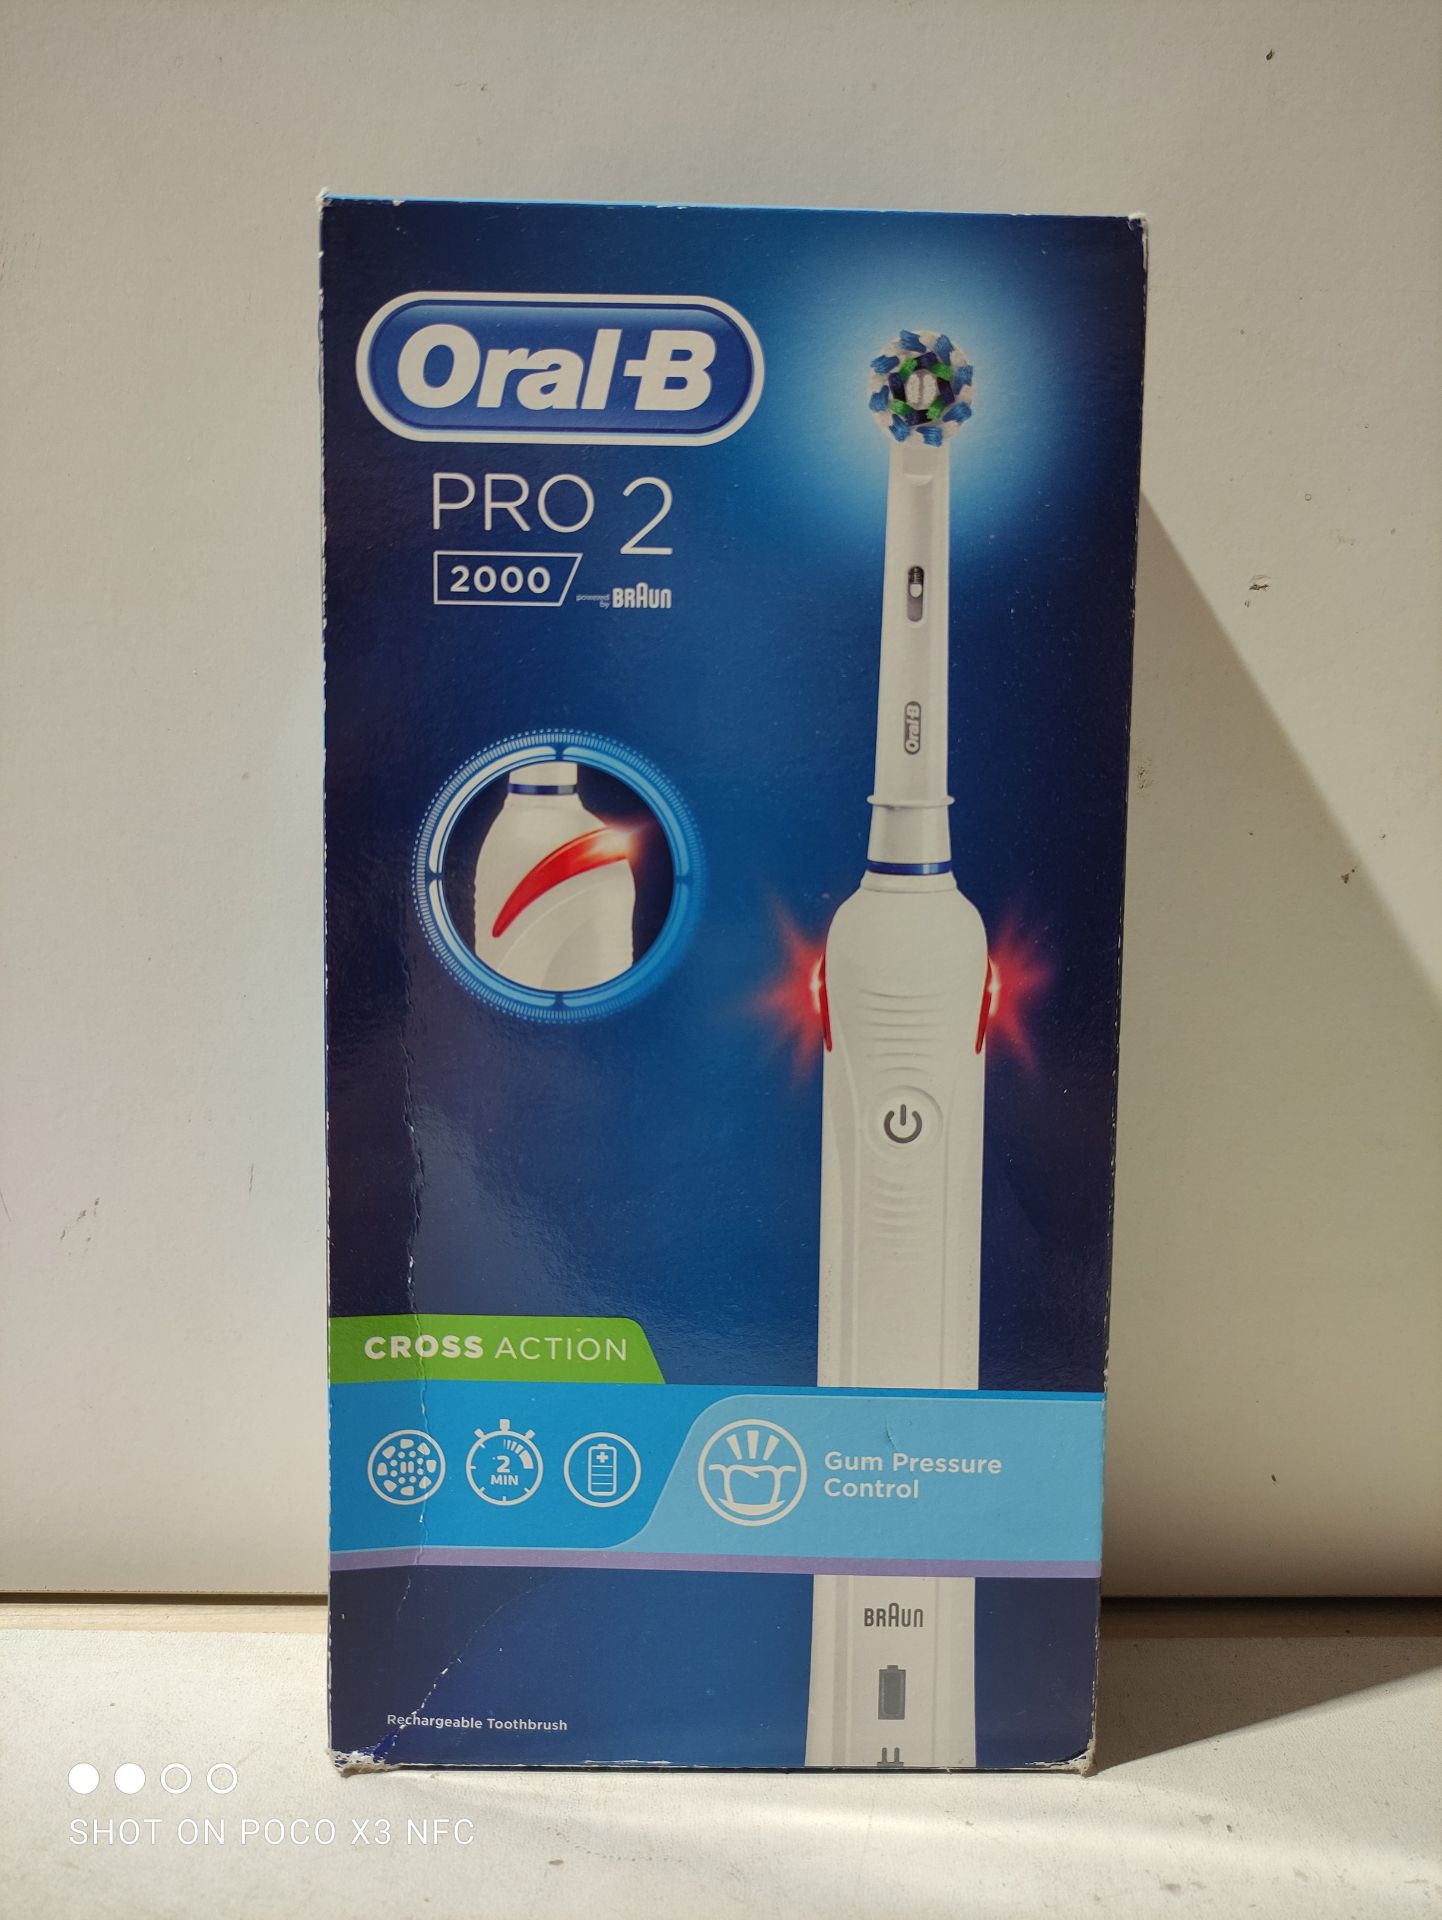 RRP £34.99 Oral-B Pro 2 CrossAction Electric Toothbrush - Image 2 of 2